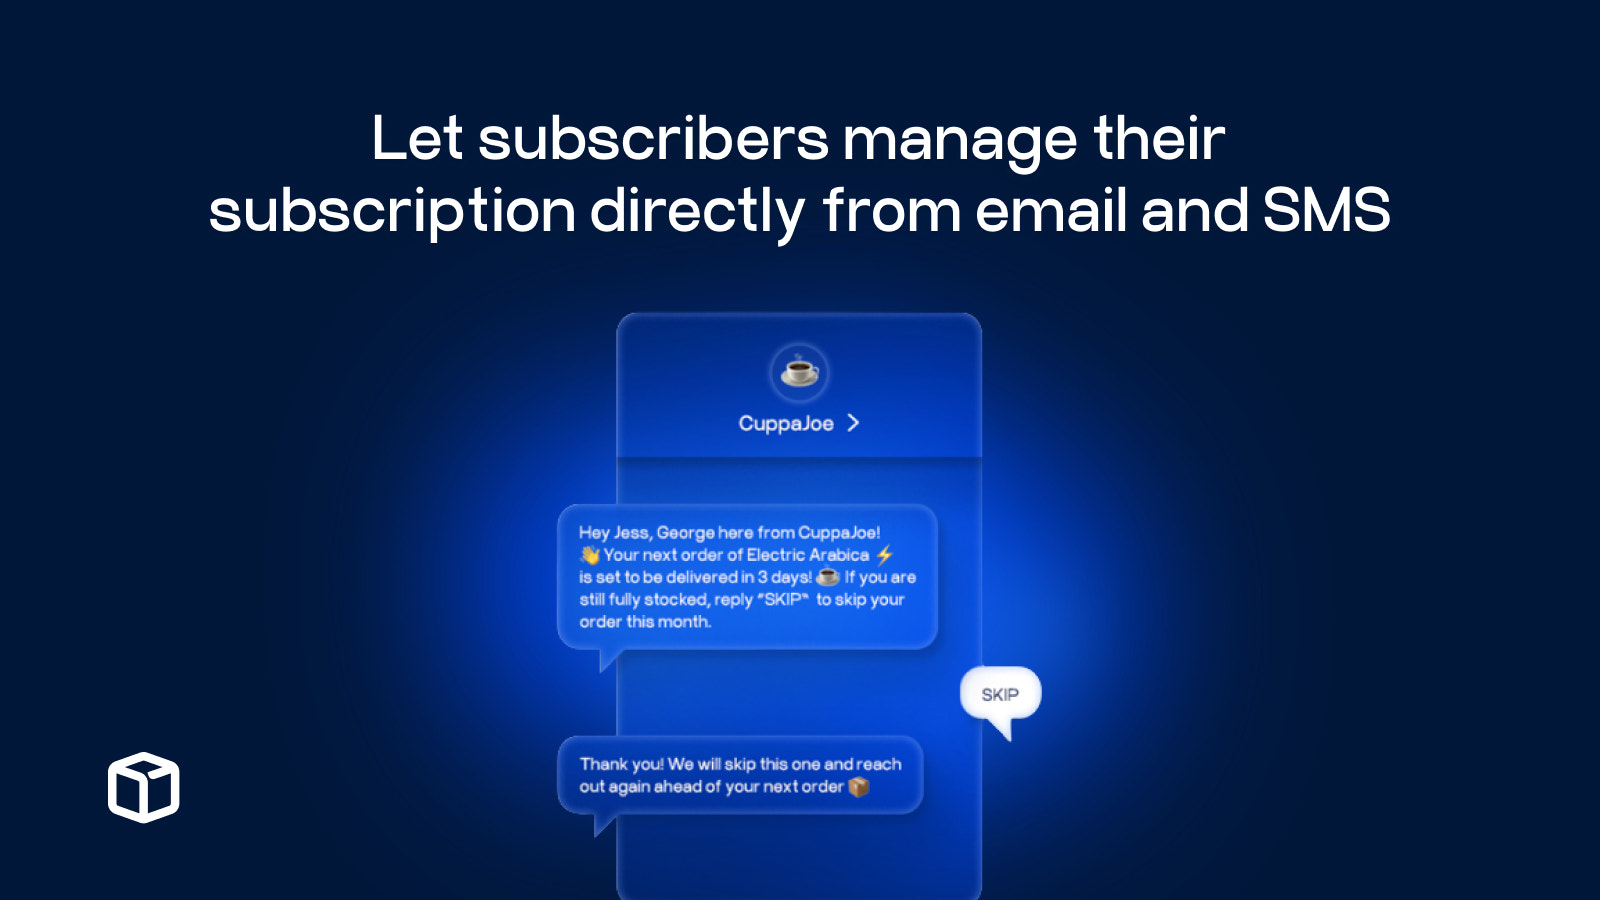 Let subscribers manage their subscription from email